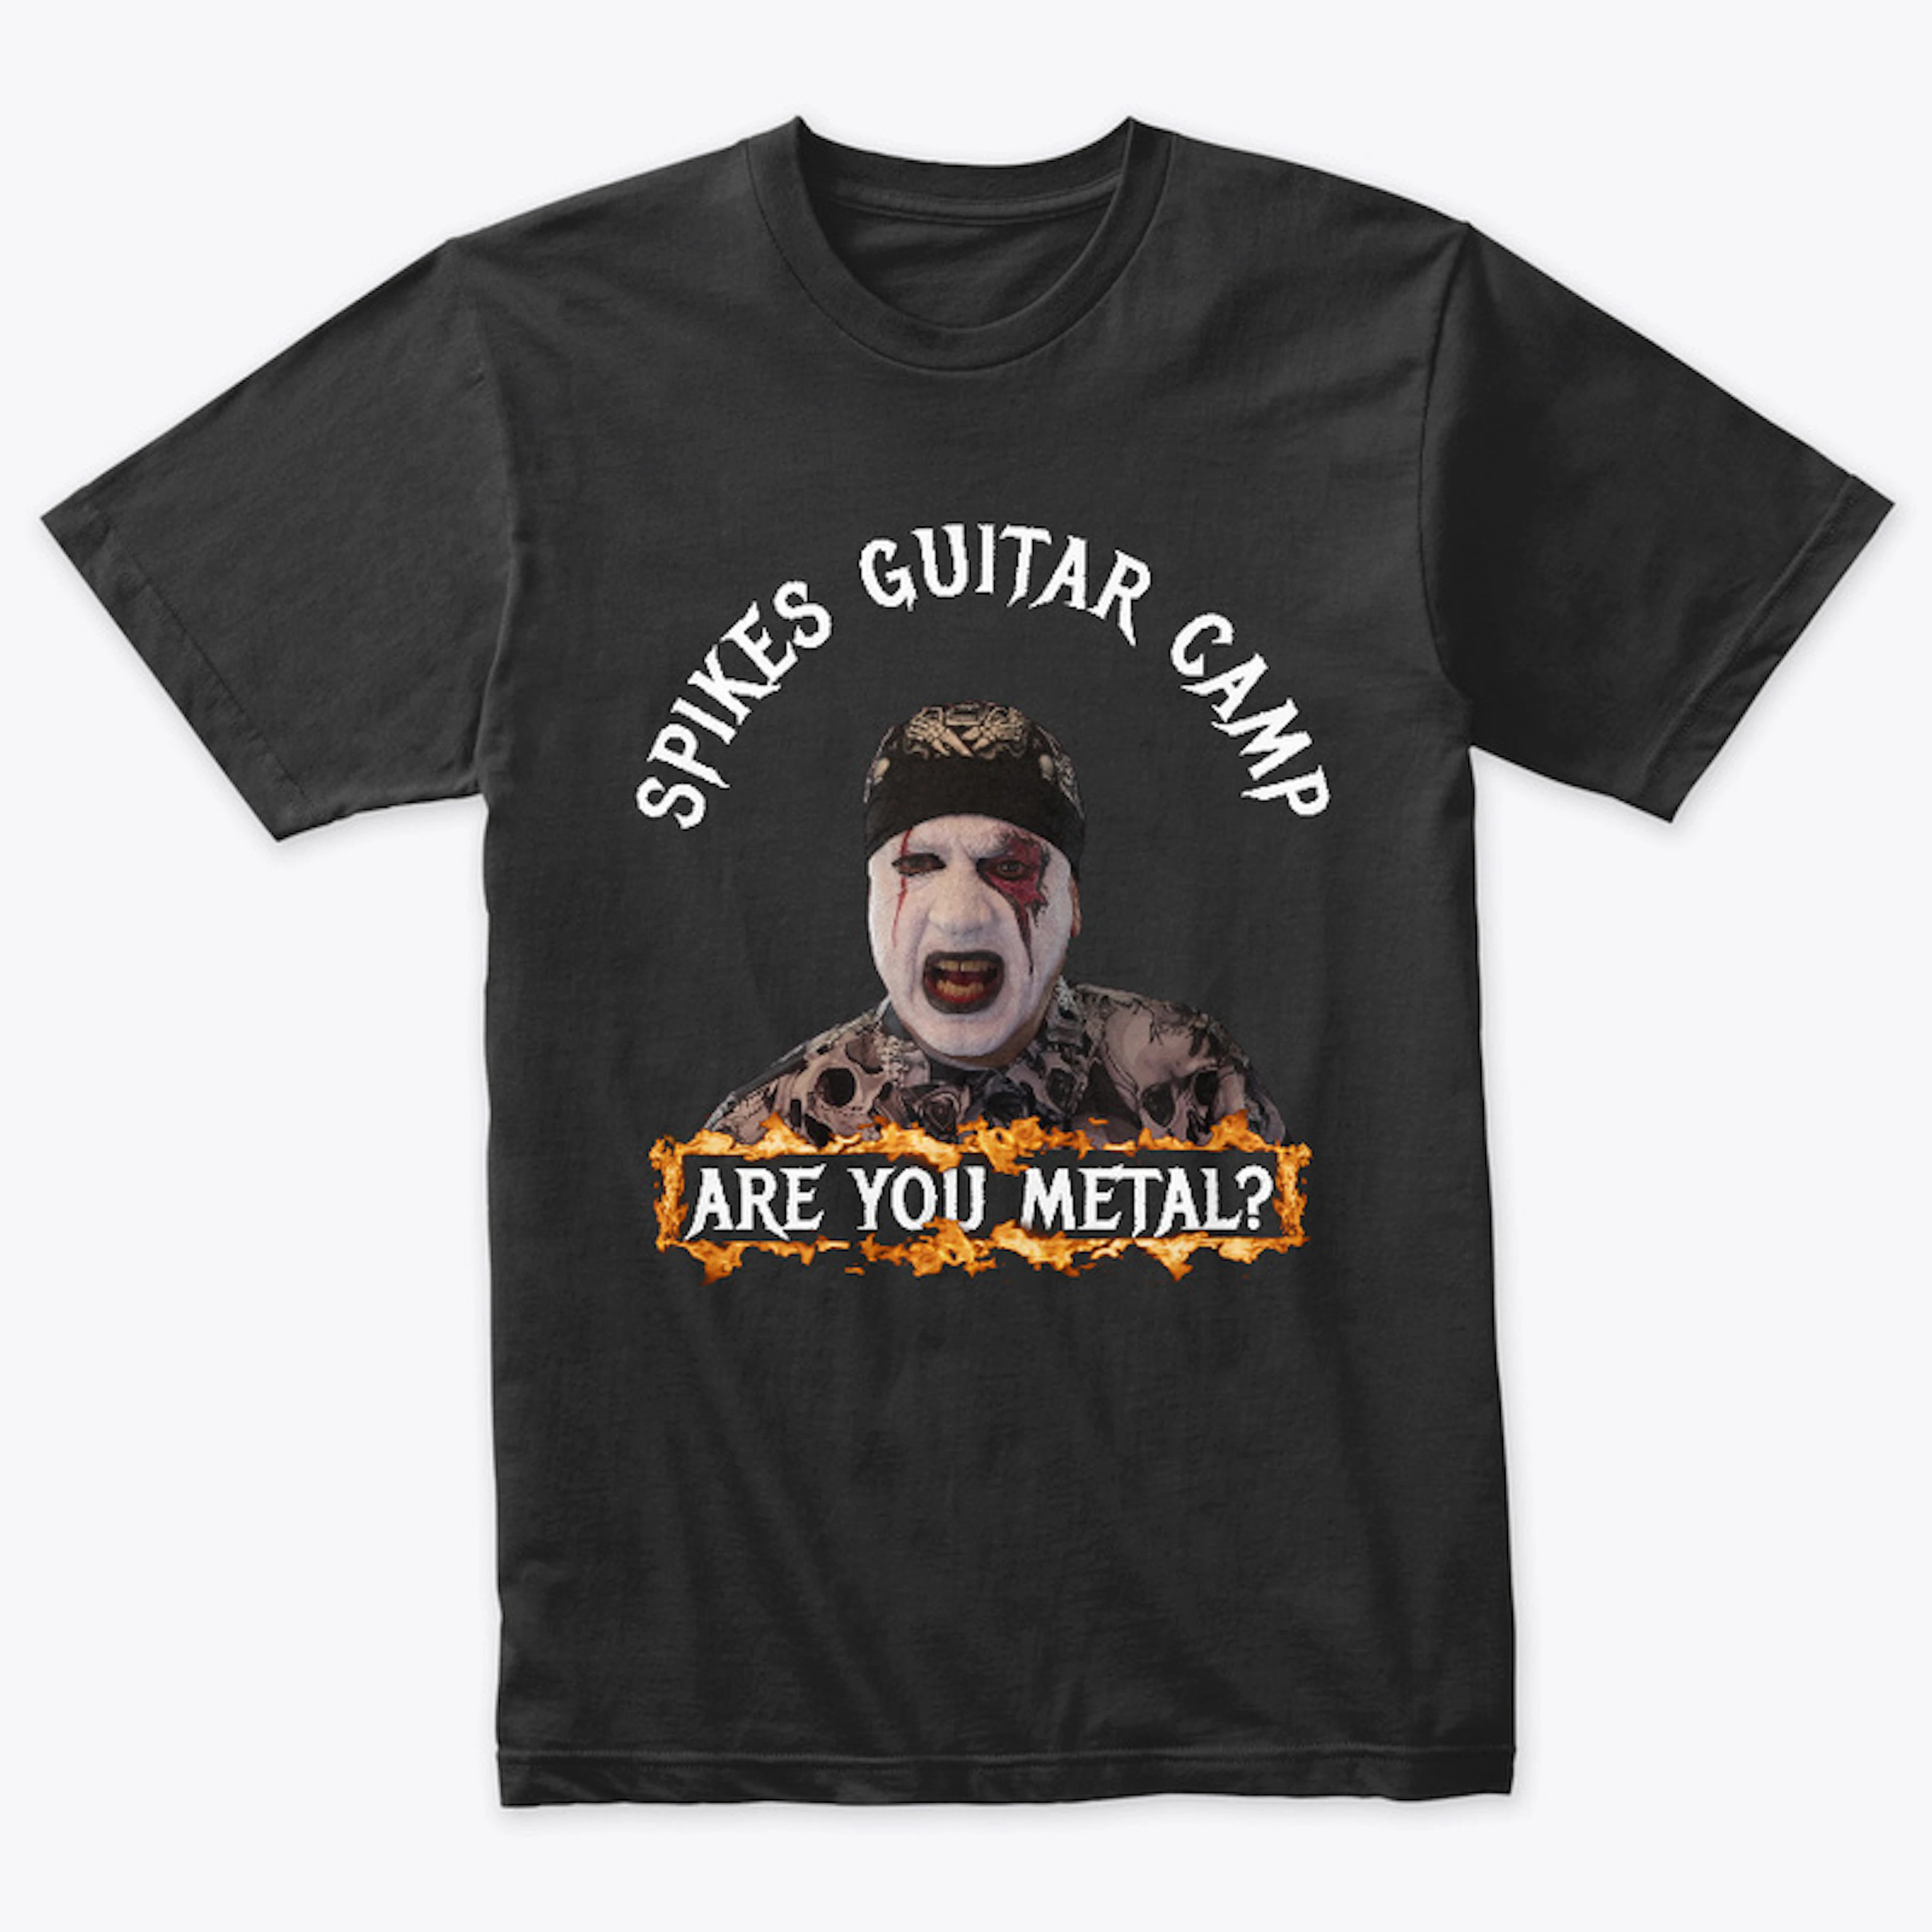 SPIKE'S GUITAR CAMP - ARE YOU METAL ?